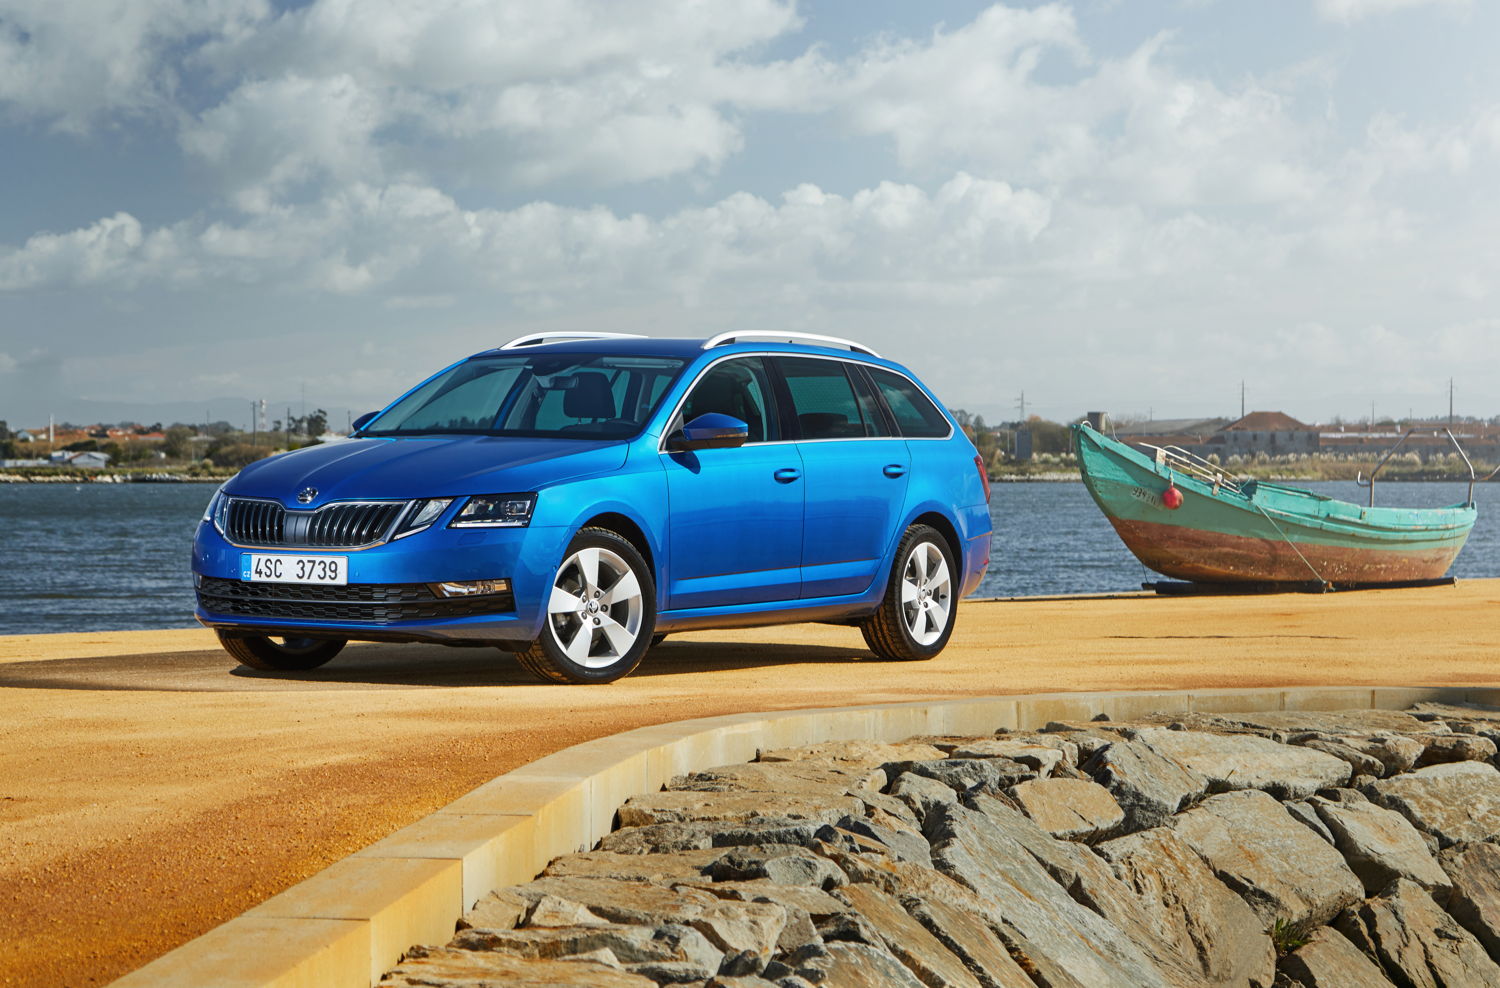 Since the first modern OCTAVIA generation was launched 21 years ago, over five million customers around the world have chosen the compact model from the long-established Czech brand. This makes the OCTAVIA model range one of the most successful in the automotive world.